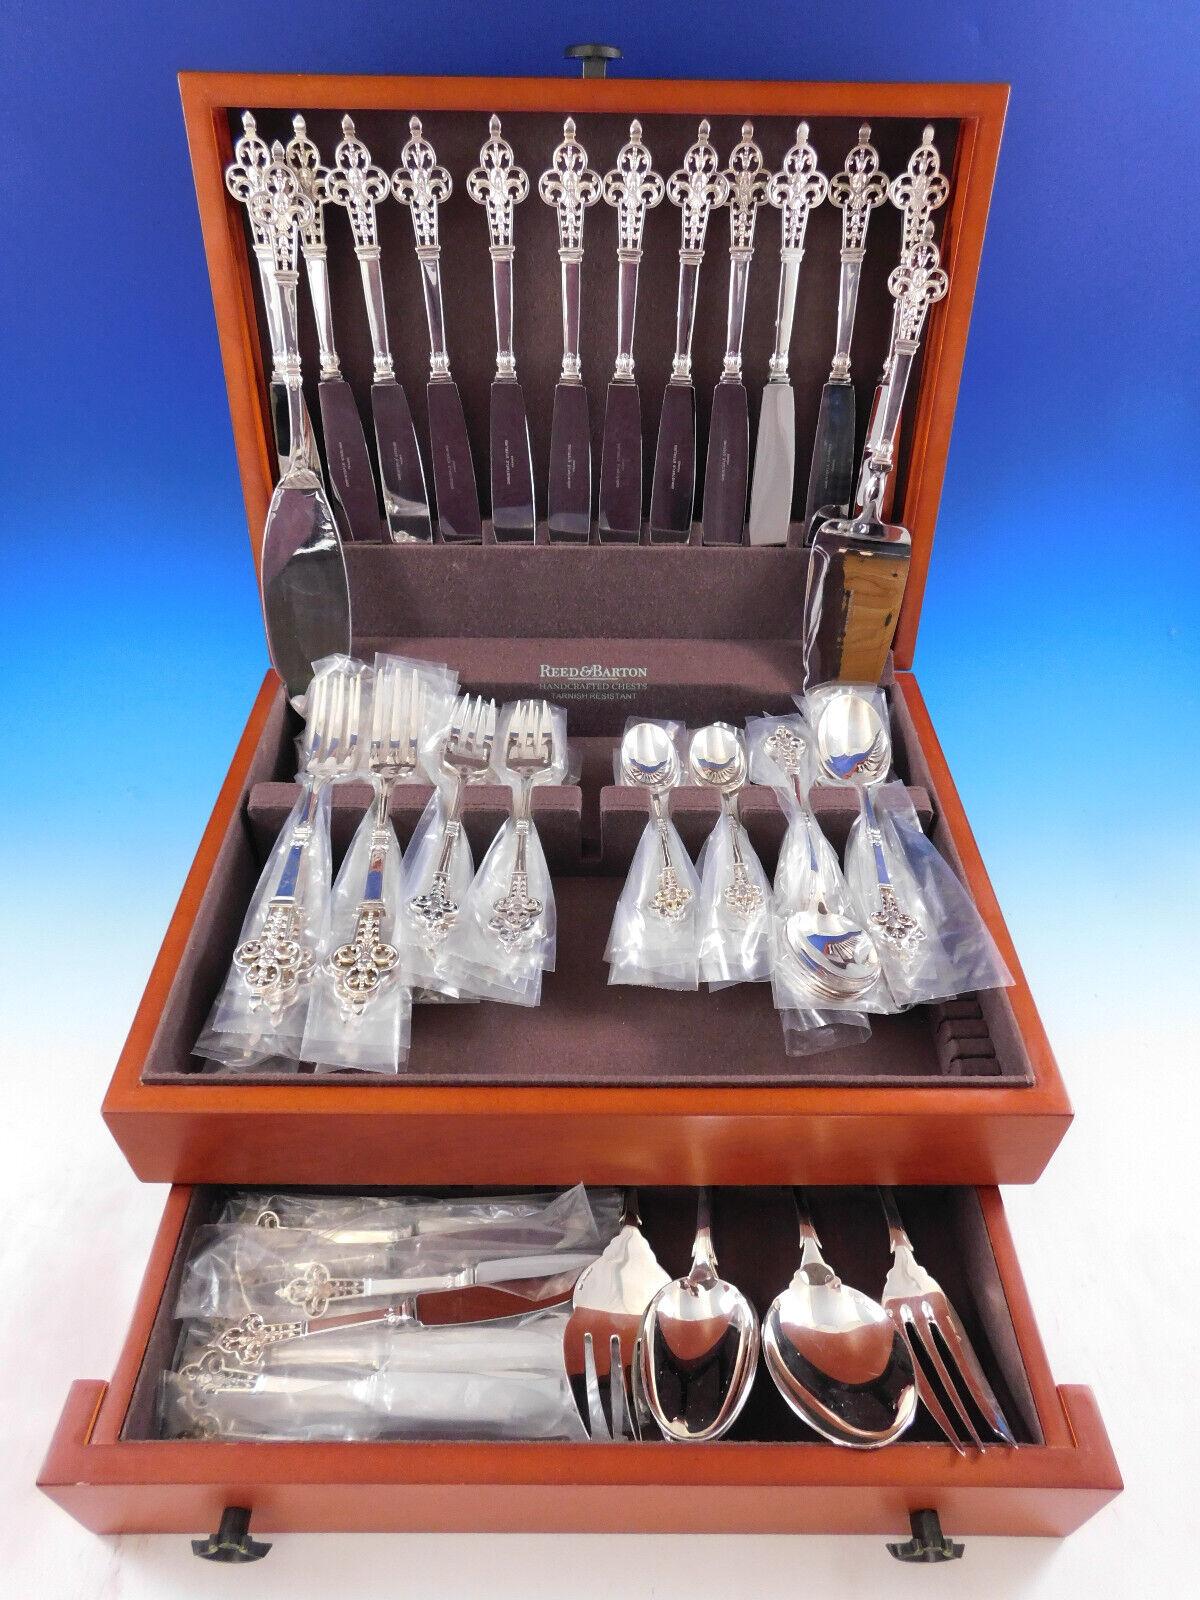 Christofle French silver flatware has been crafted by master artisans since 1830. The revolutionary style and character of Christofle dinnerware comes from collaborations with groundbreaking architects, designers, and artists from around the world.